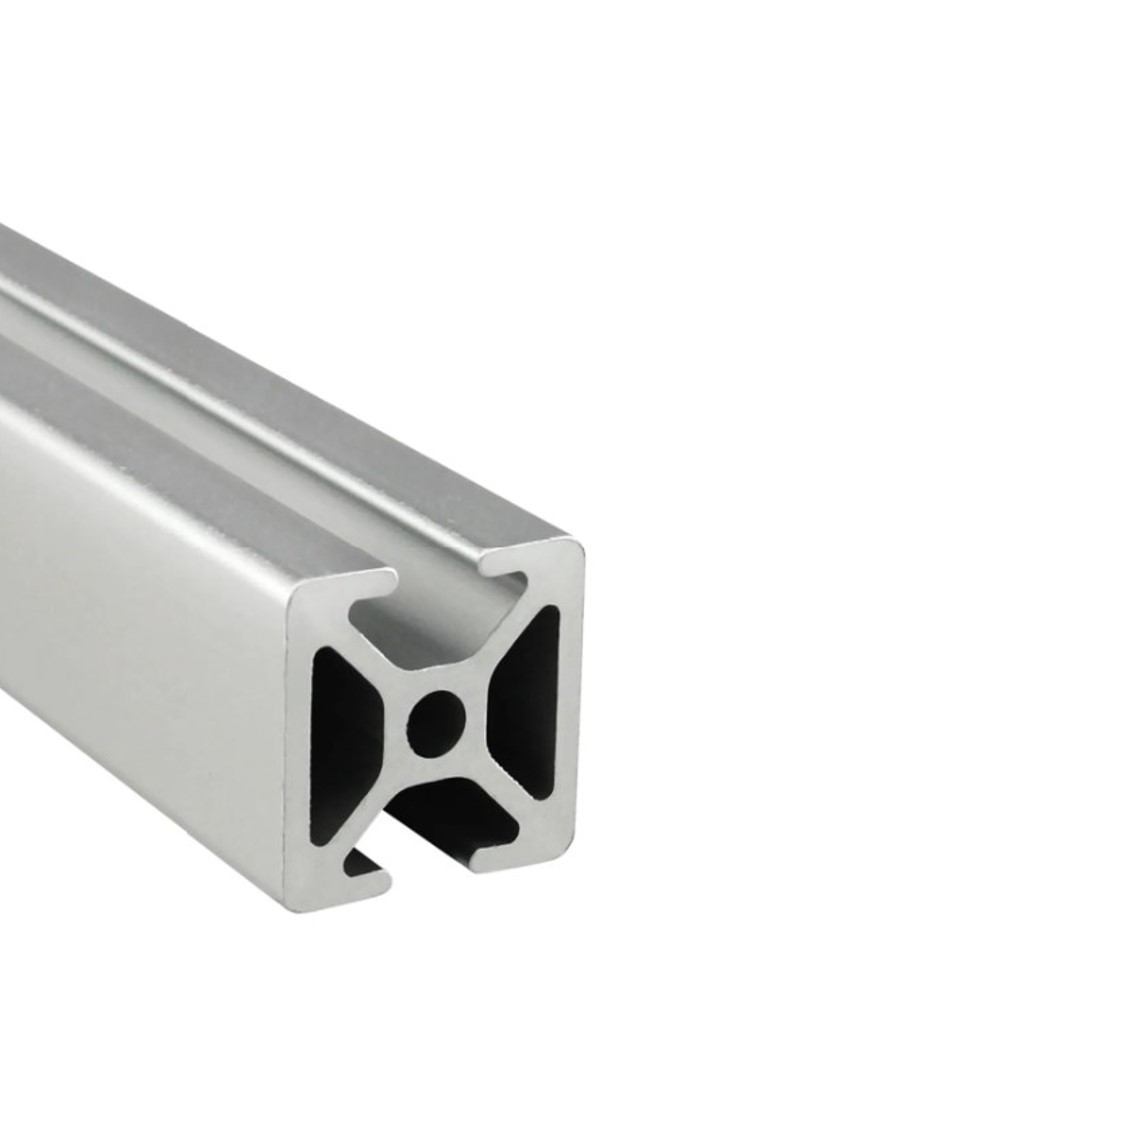 1" X 1" Opposite Smooth Bi-Slotted - 10 Series